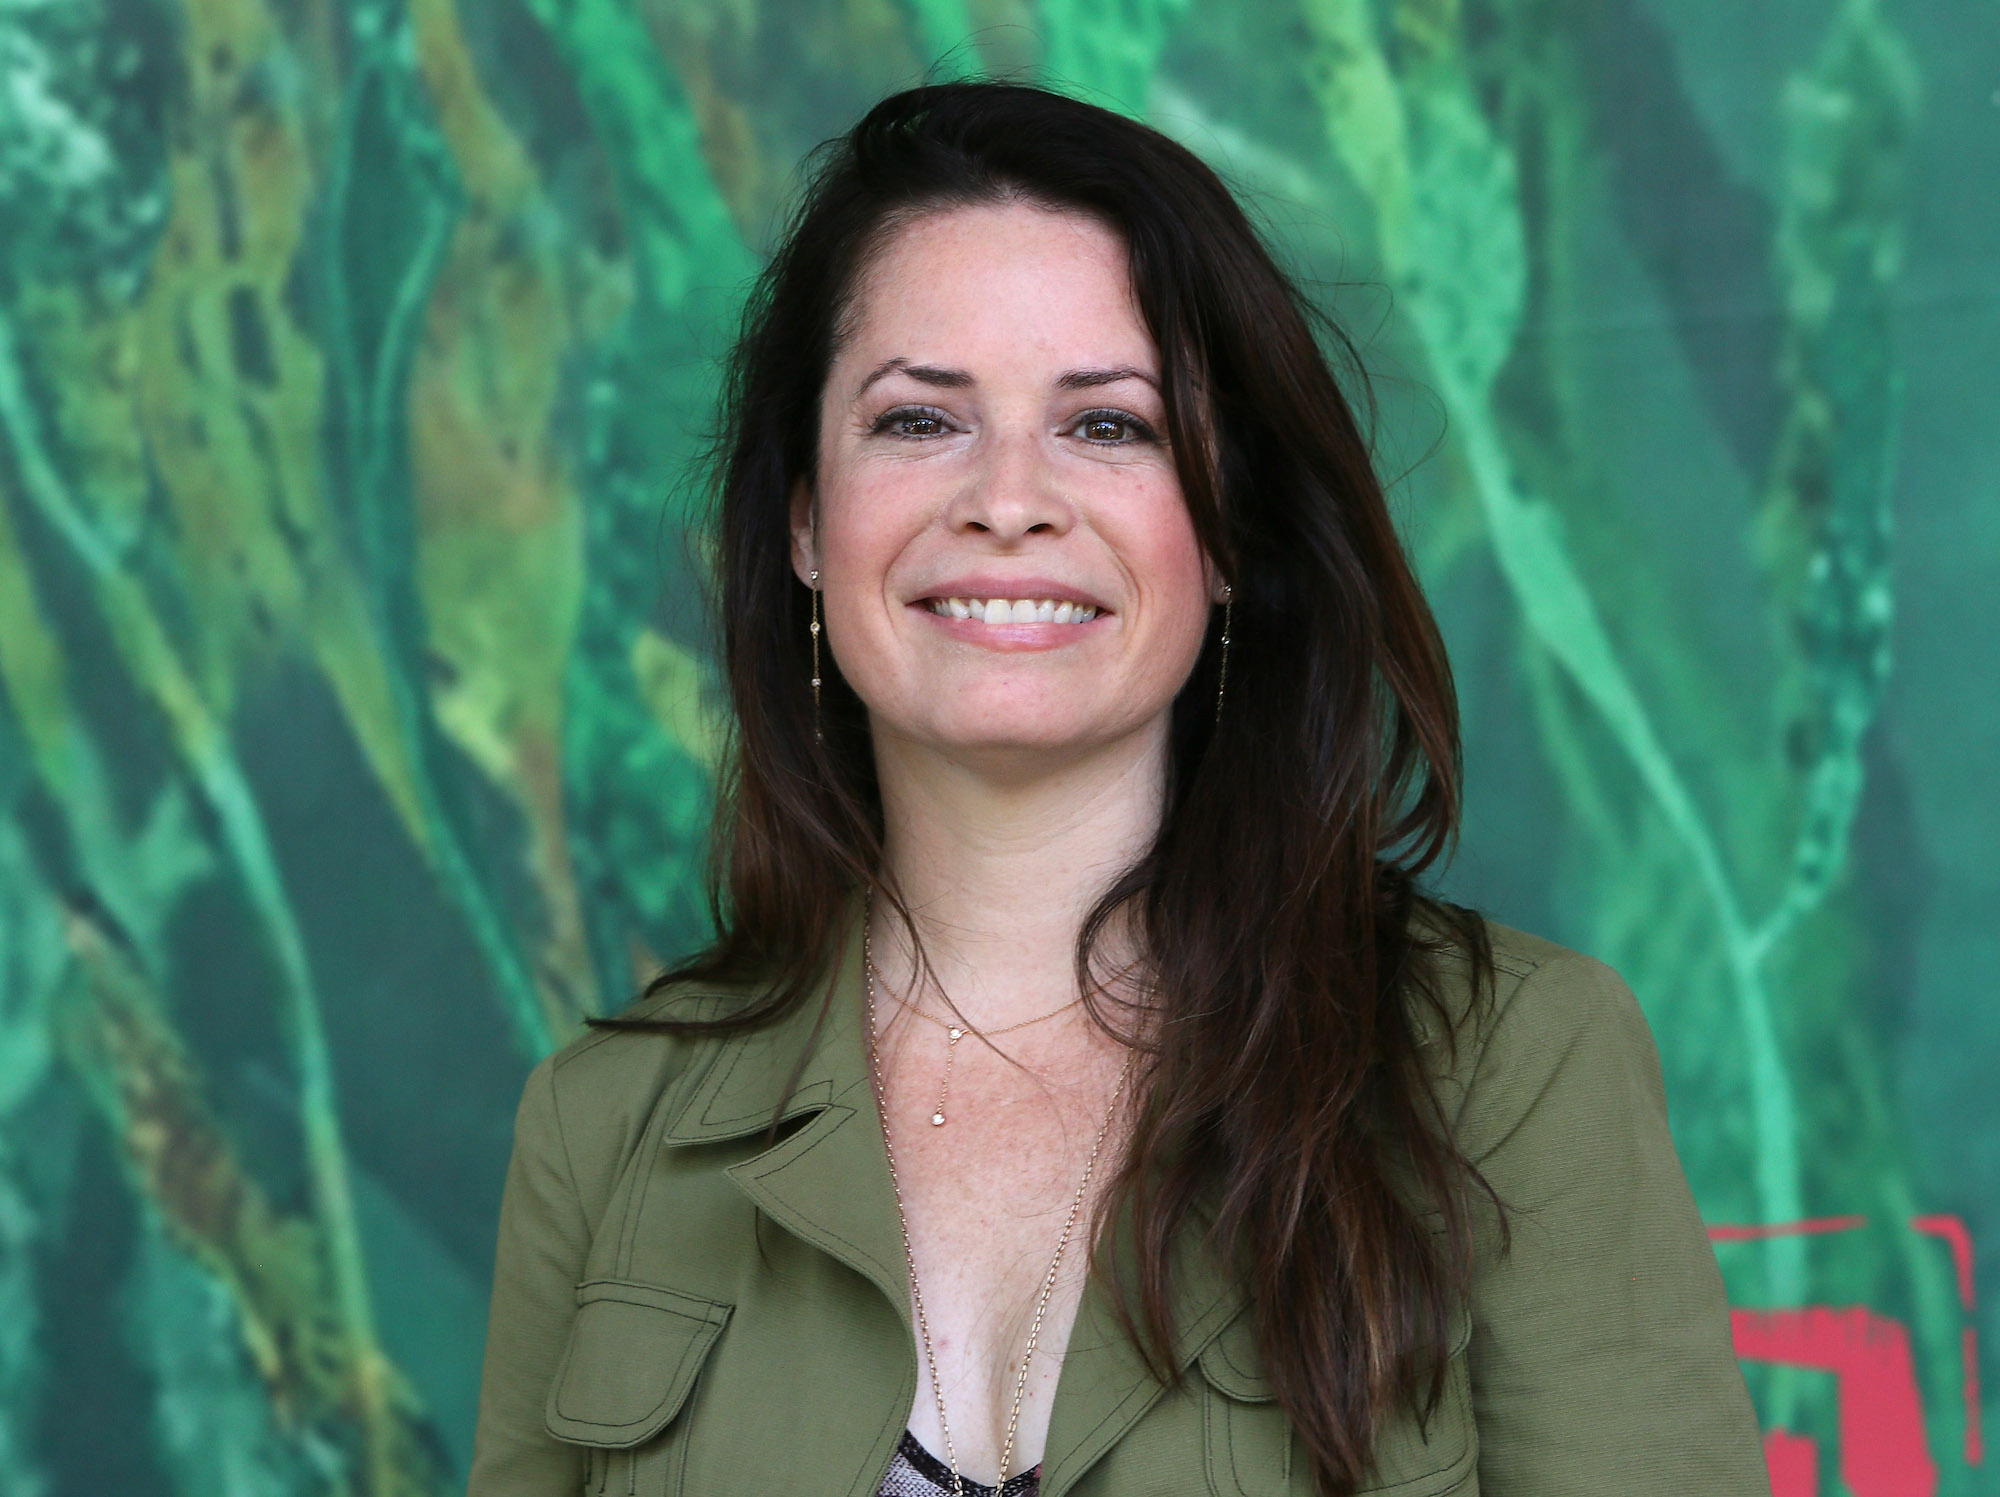 Holly Marie Combs smiling in front of a green background